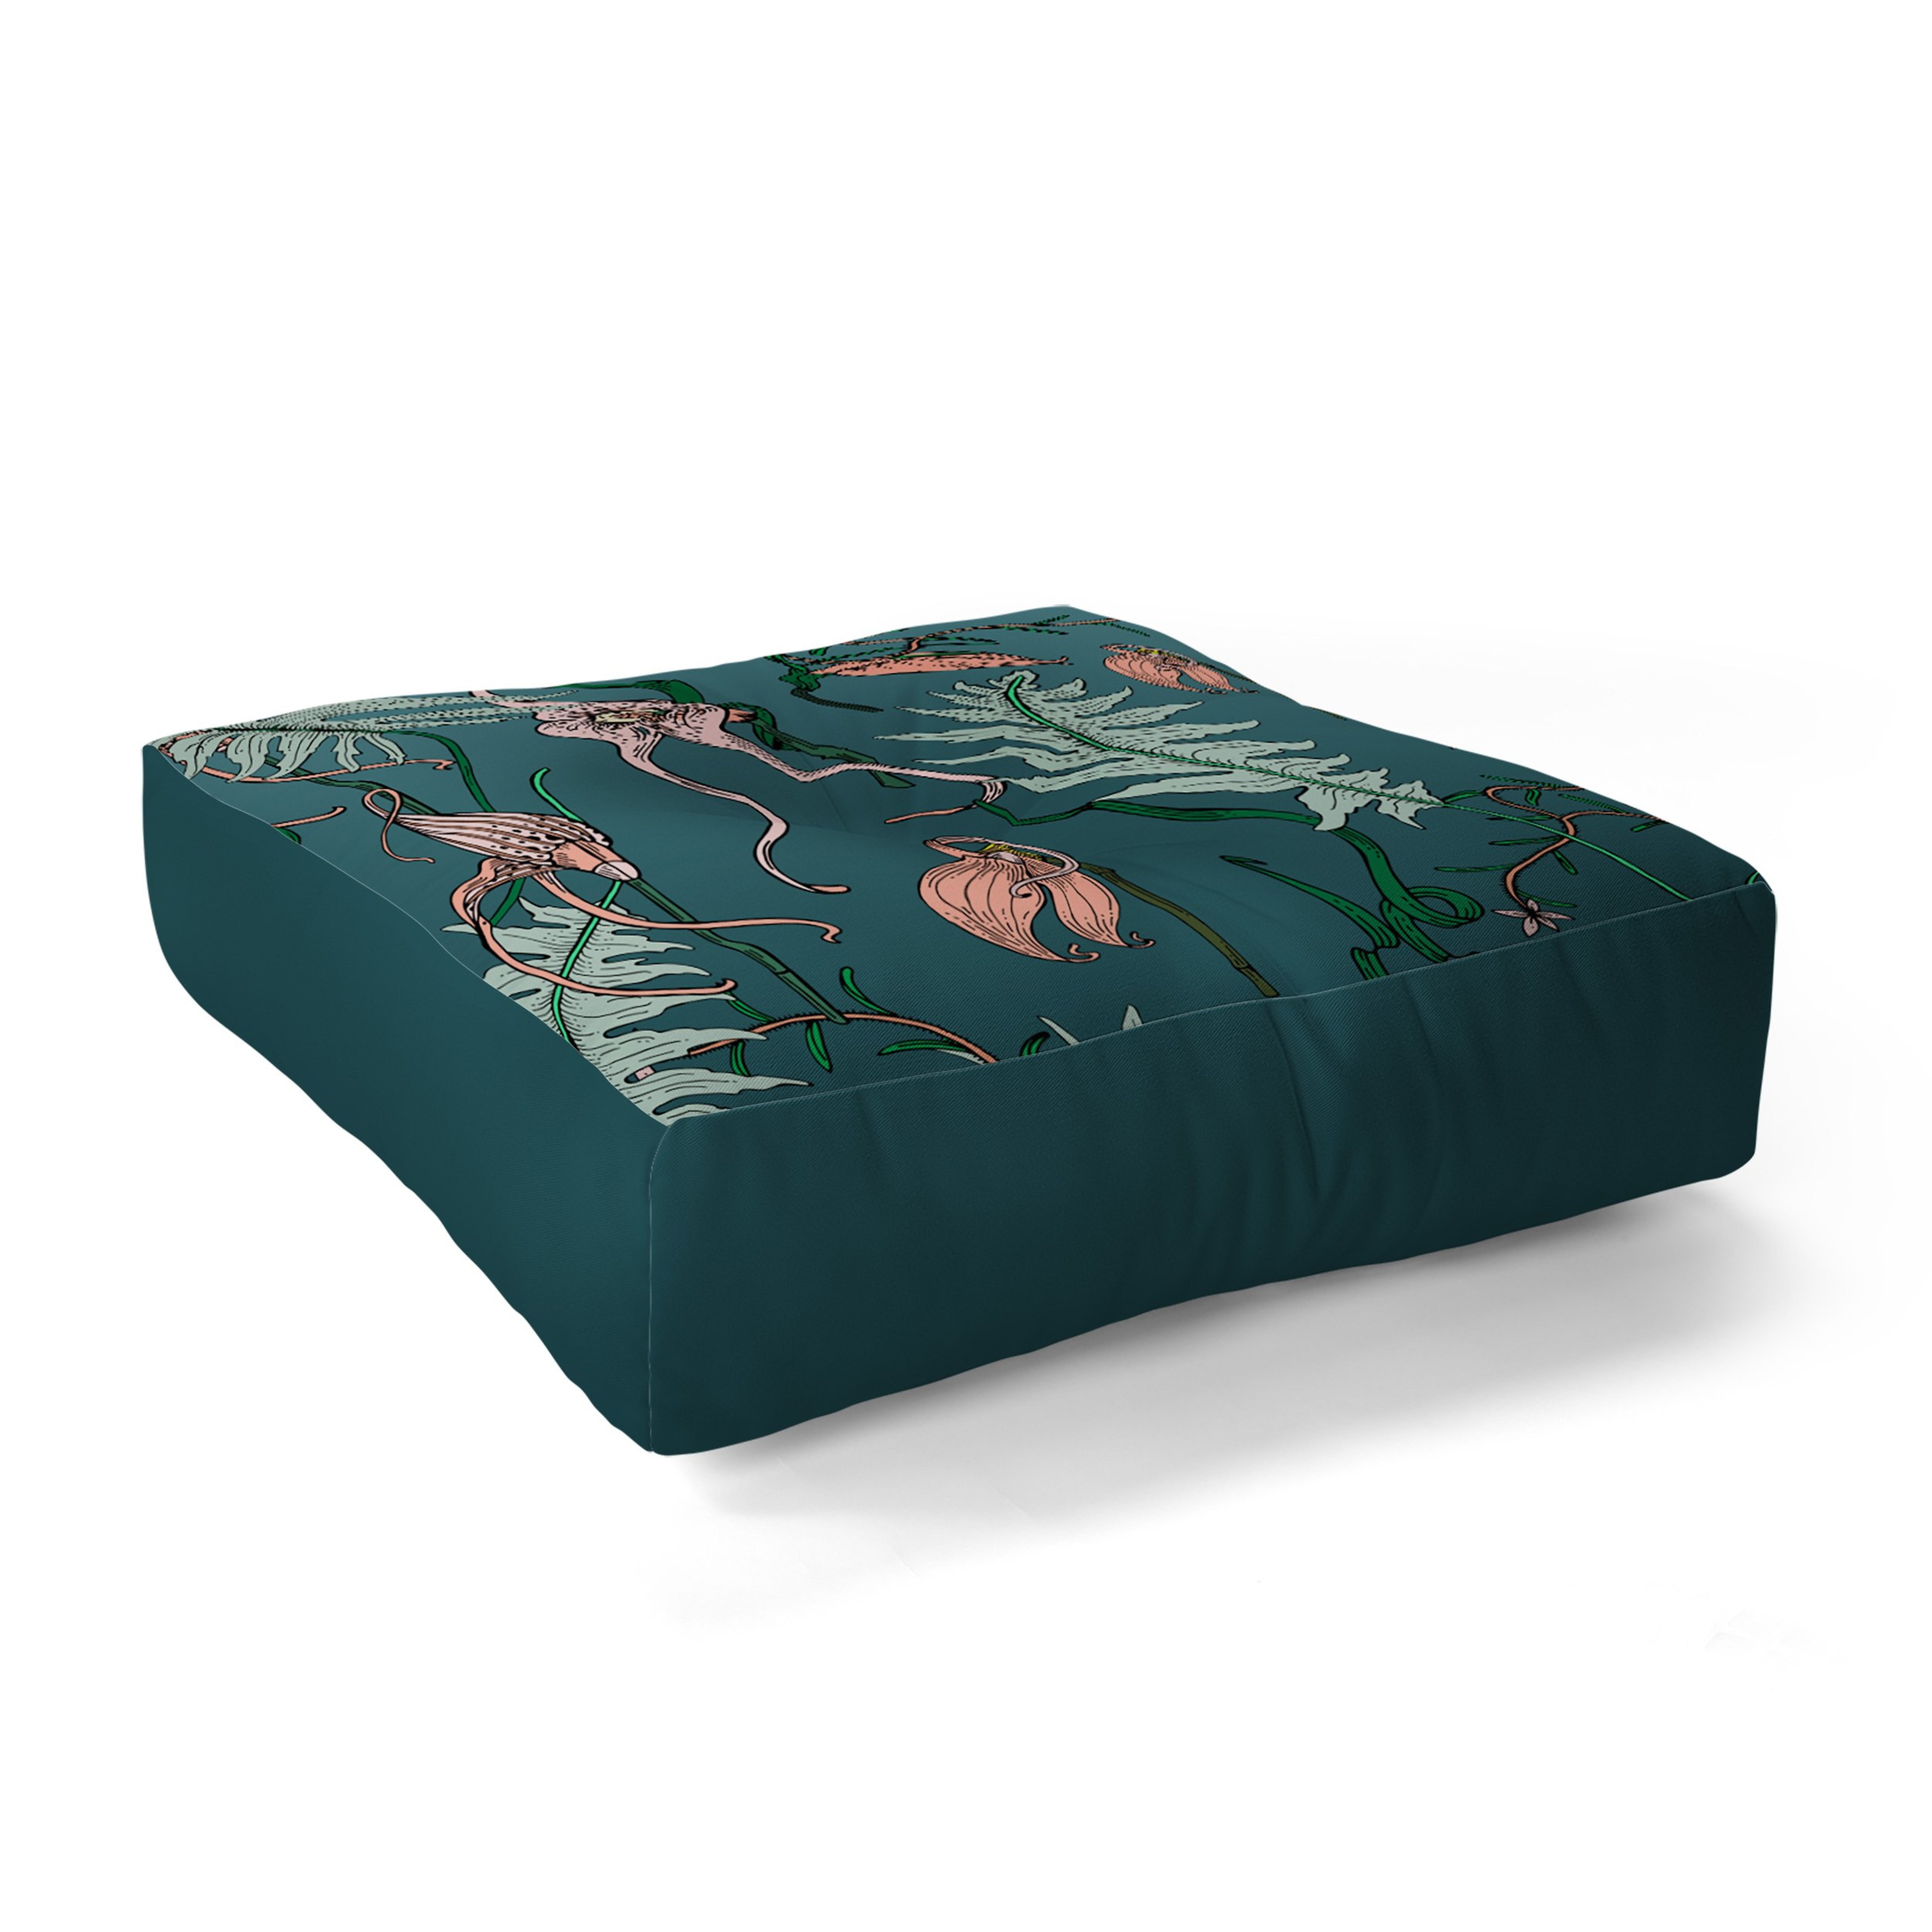 ORCHID BOTANICAL FLOOR PILLOW // SQUARE 26x26 - Wander Print Co.